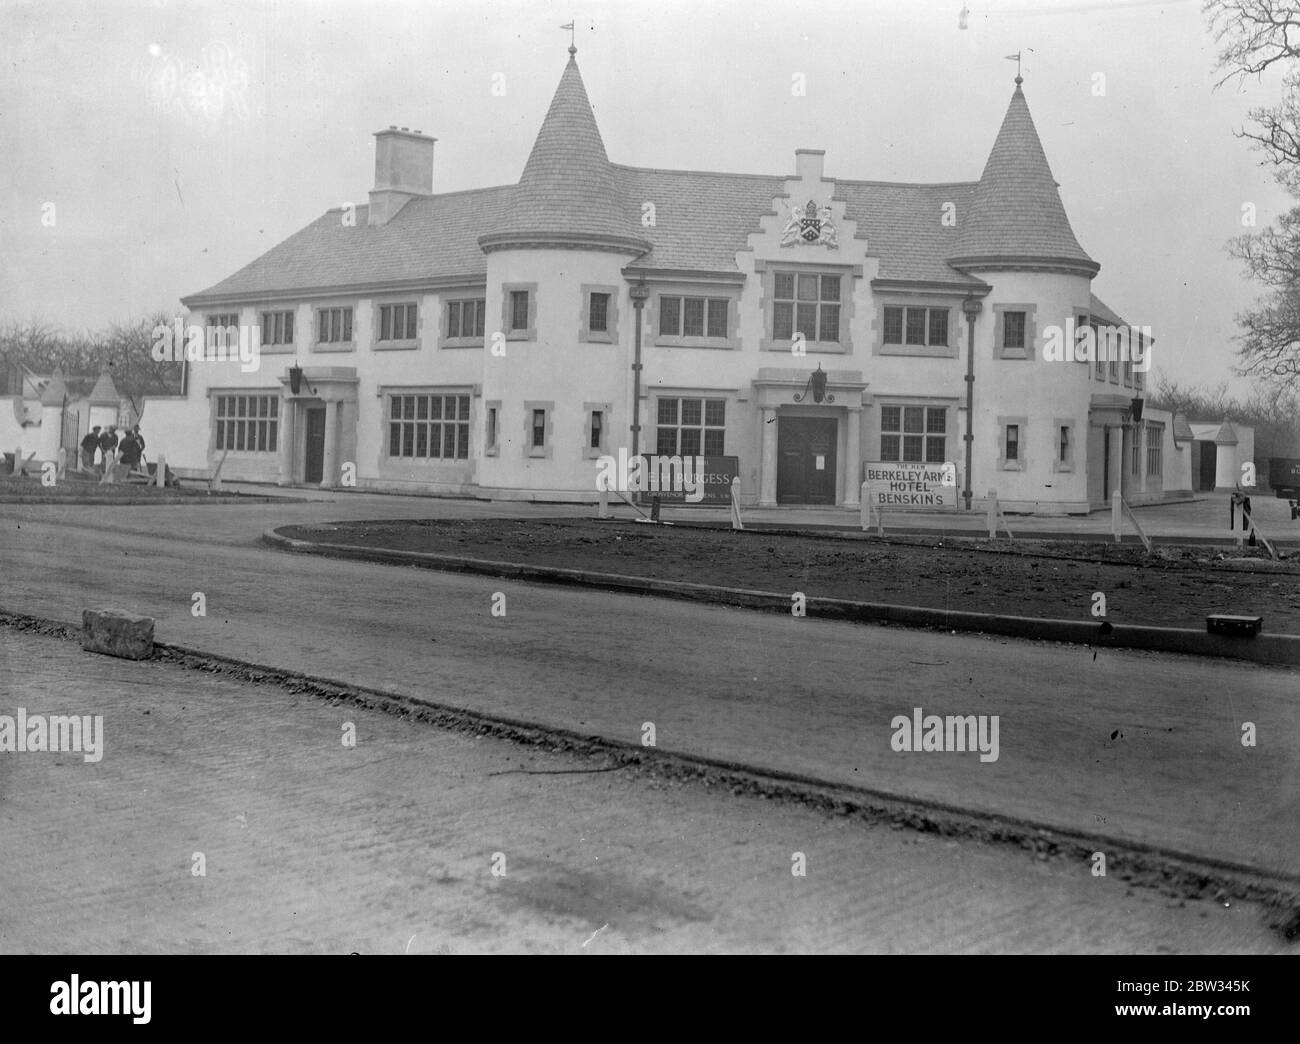 Public house in the form of a French chateau . A new public house which has been erected on the Grat West road near the Staines bypass , has been built to resemble a French chateau . The new chateau like public house on the Great West road . 6 February 1932 . Stock Photo